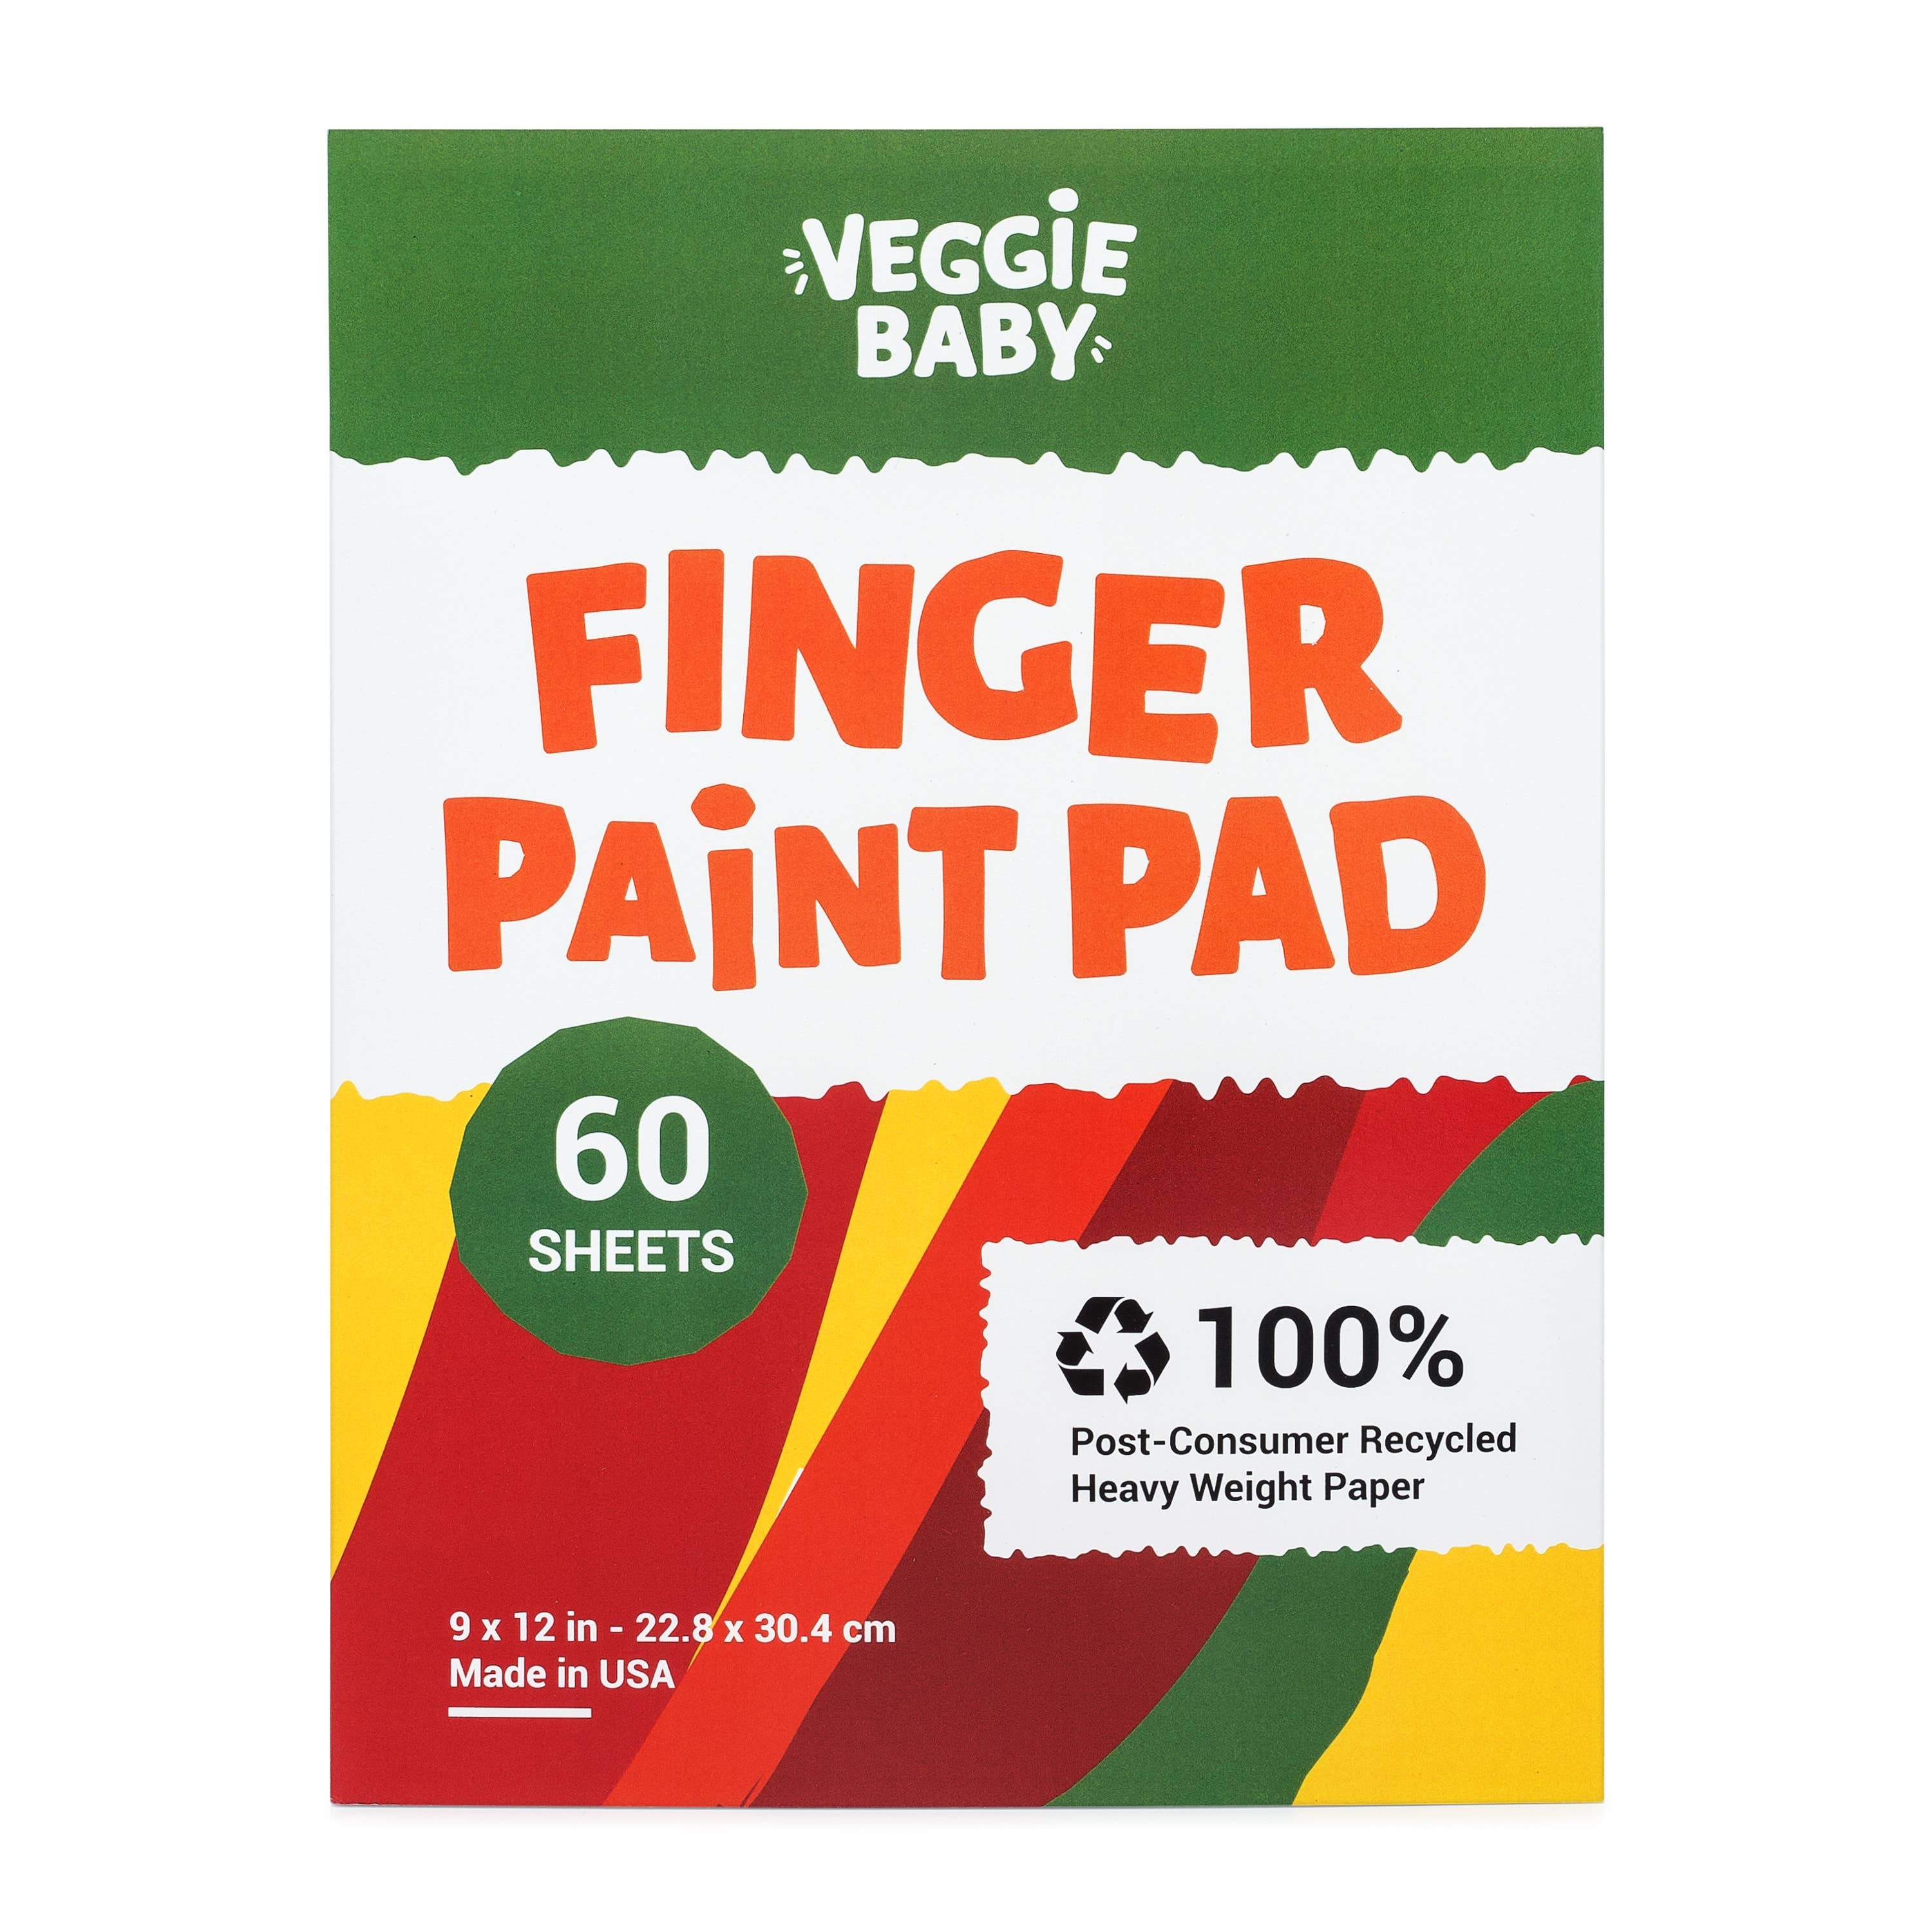 Veggie Baby Art Paper Pad for Finger Painting, Drawing and Coloring, 60 Sheets, Kid’s and Toddler’s Multimedia Paint Use, Unwaxed Heavy Stock for